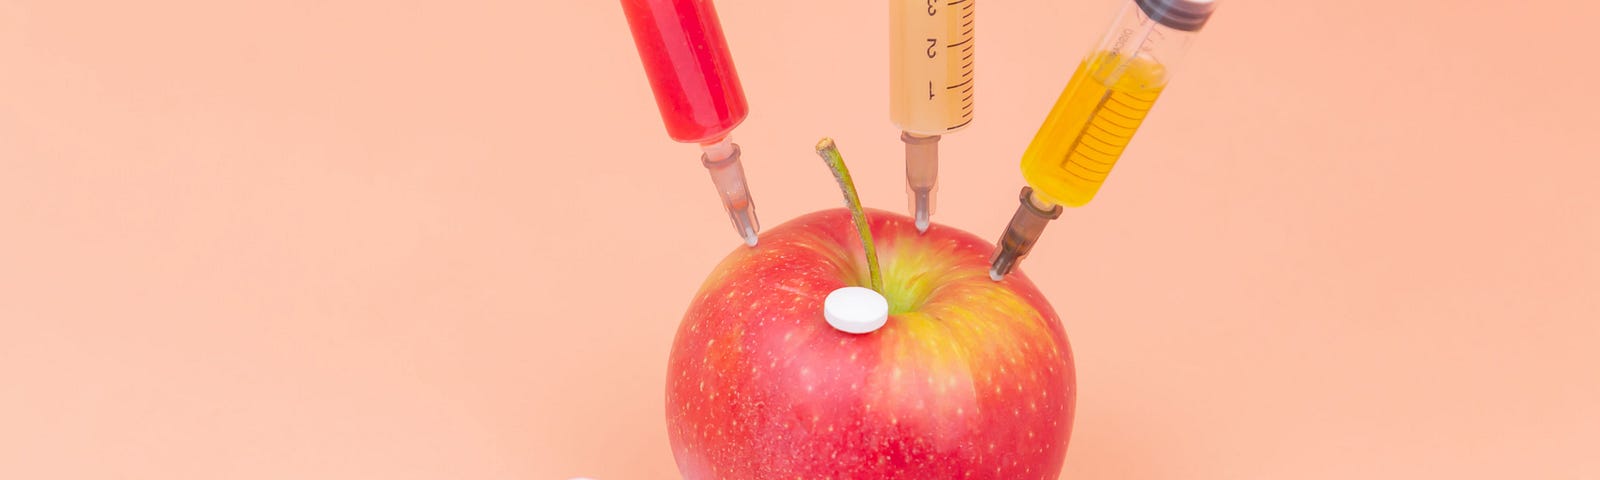 Picture an apple being manipulated with several chemicals using syringes.